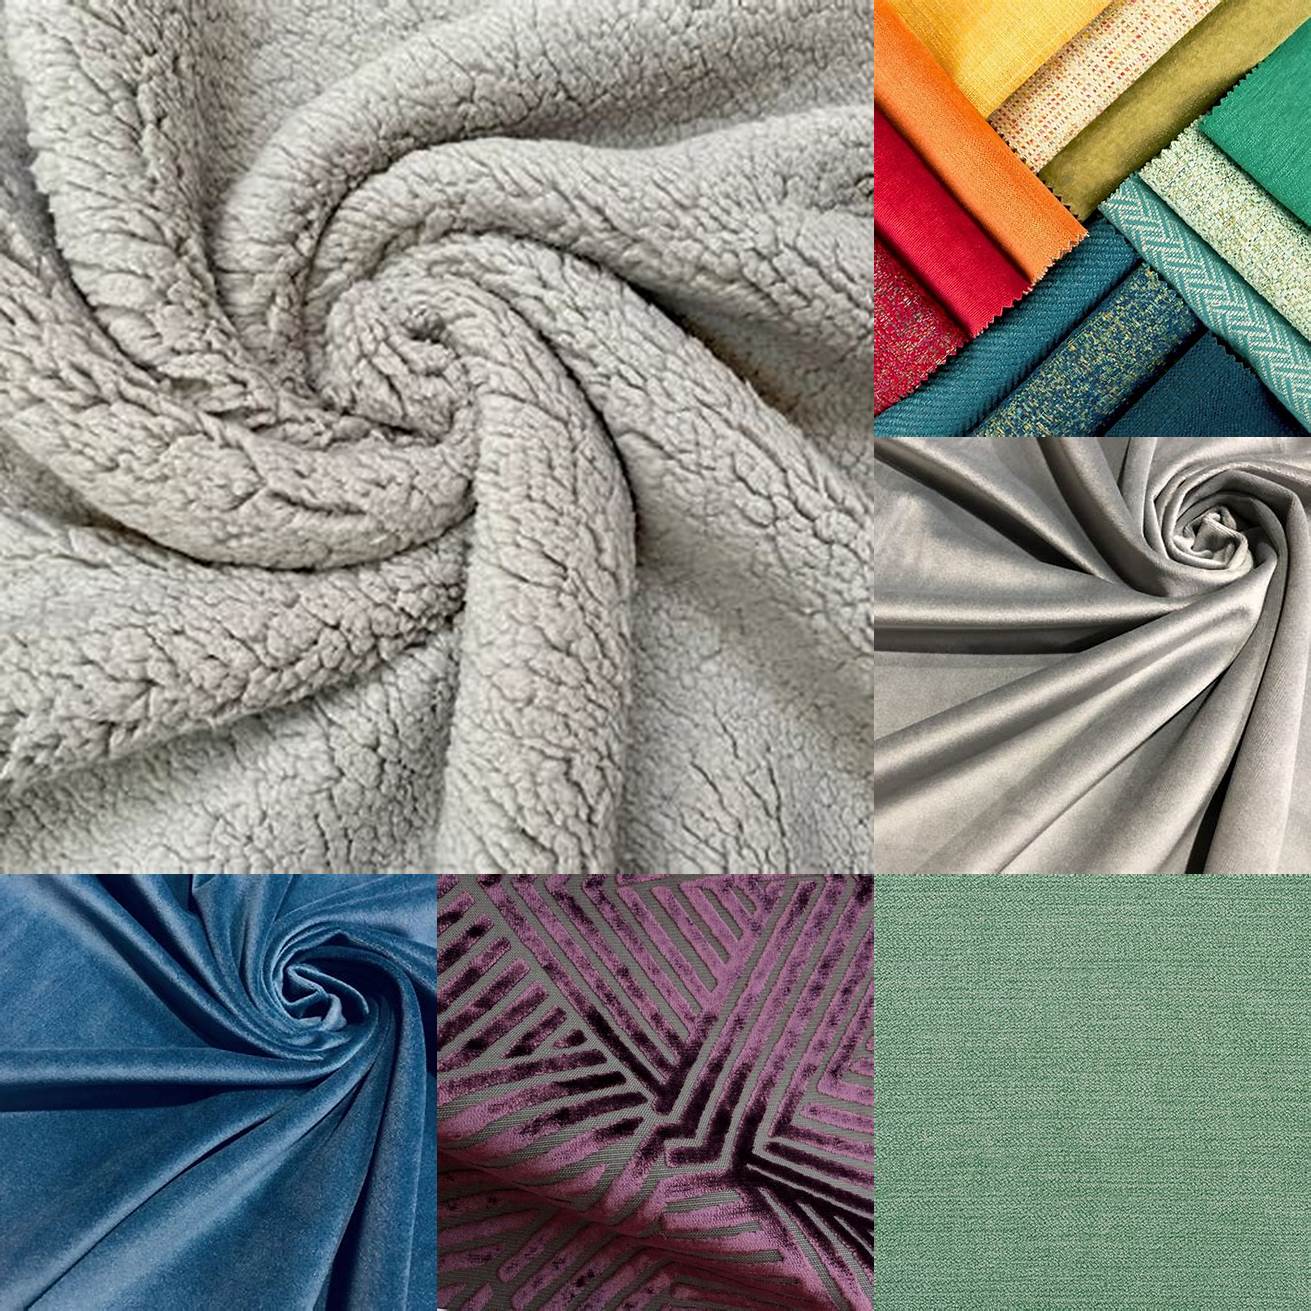 Fabric - Fabric upholstery is soft and comfortable and comes in a wide range of colors and patterns